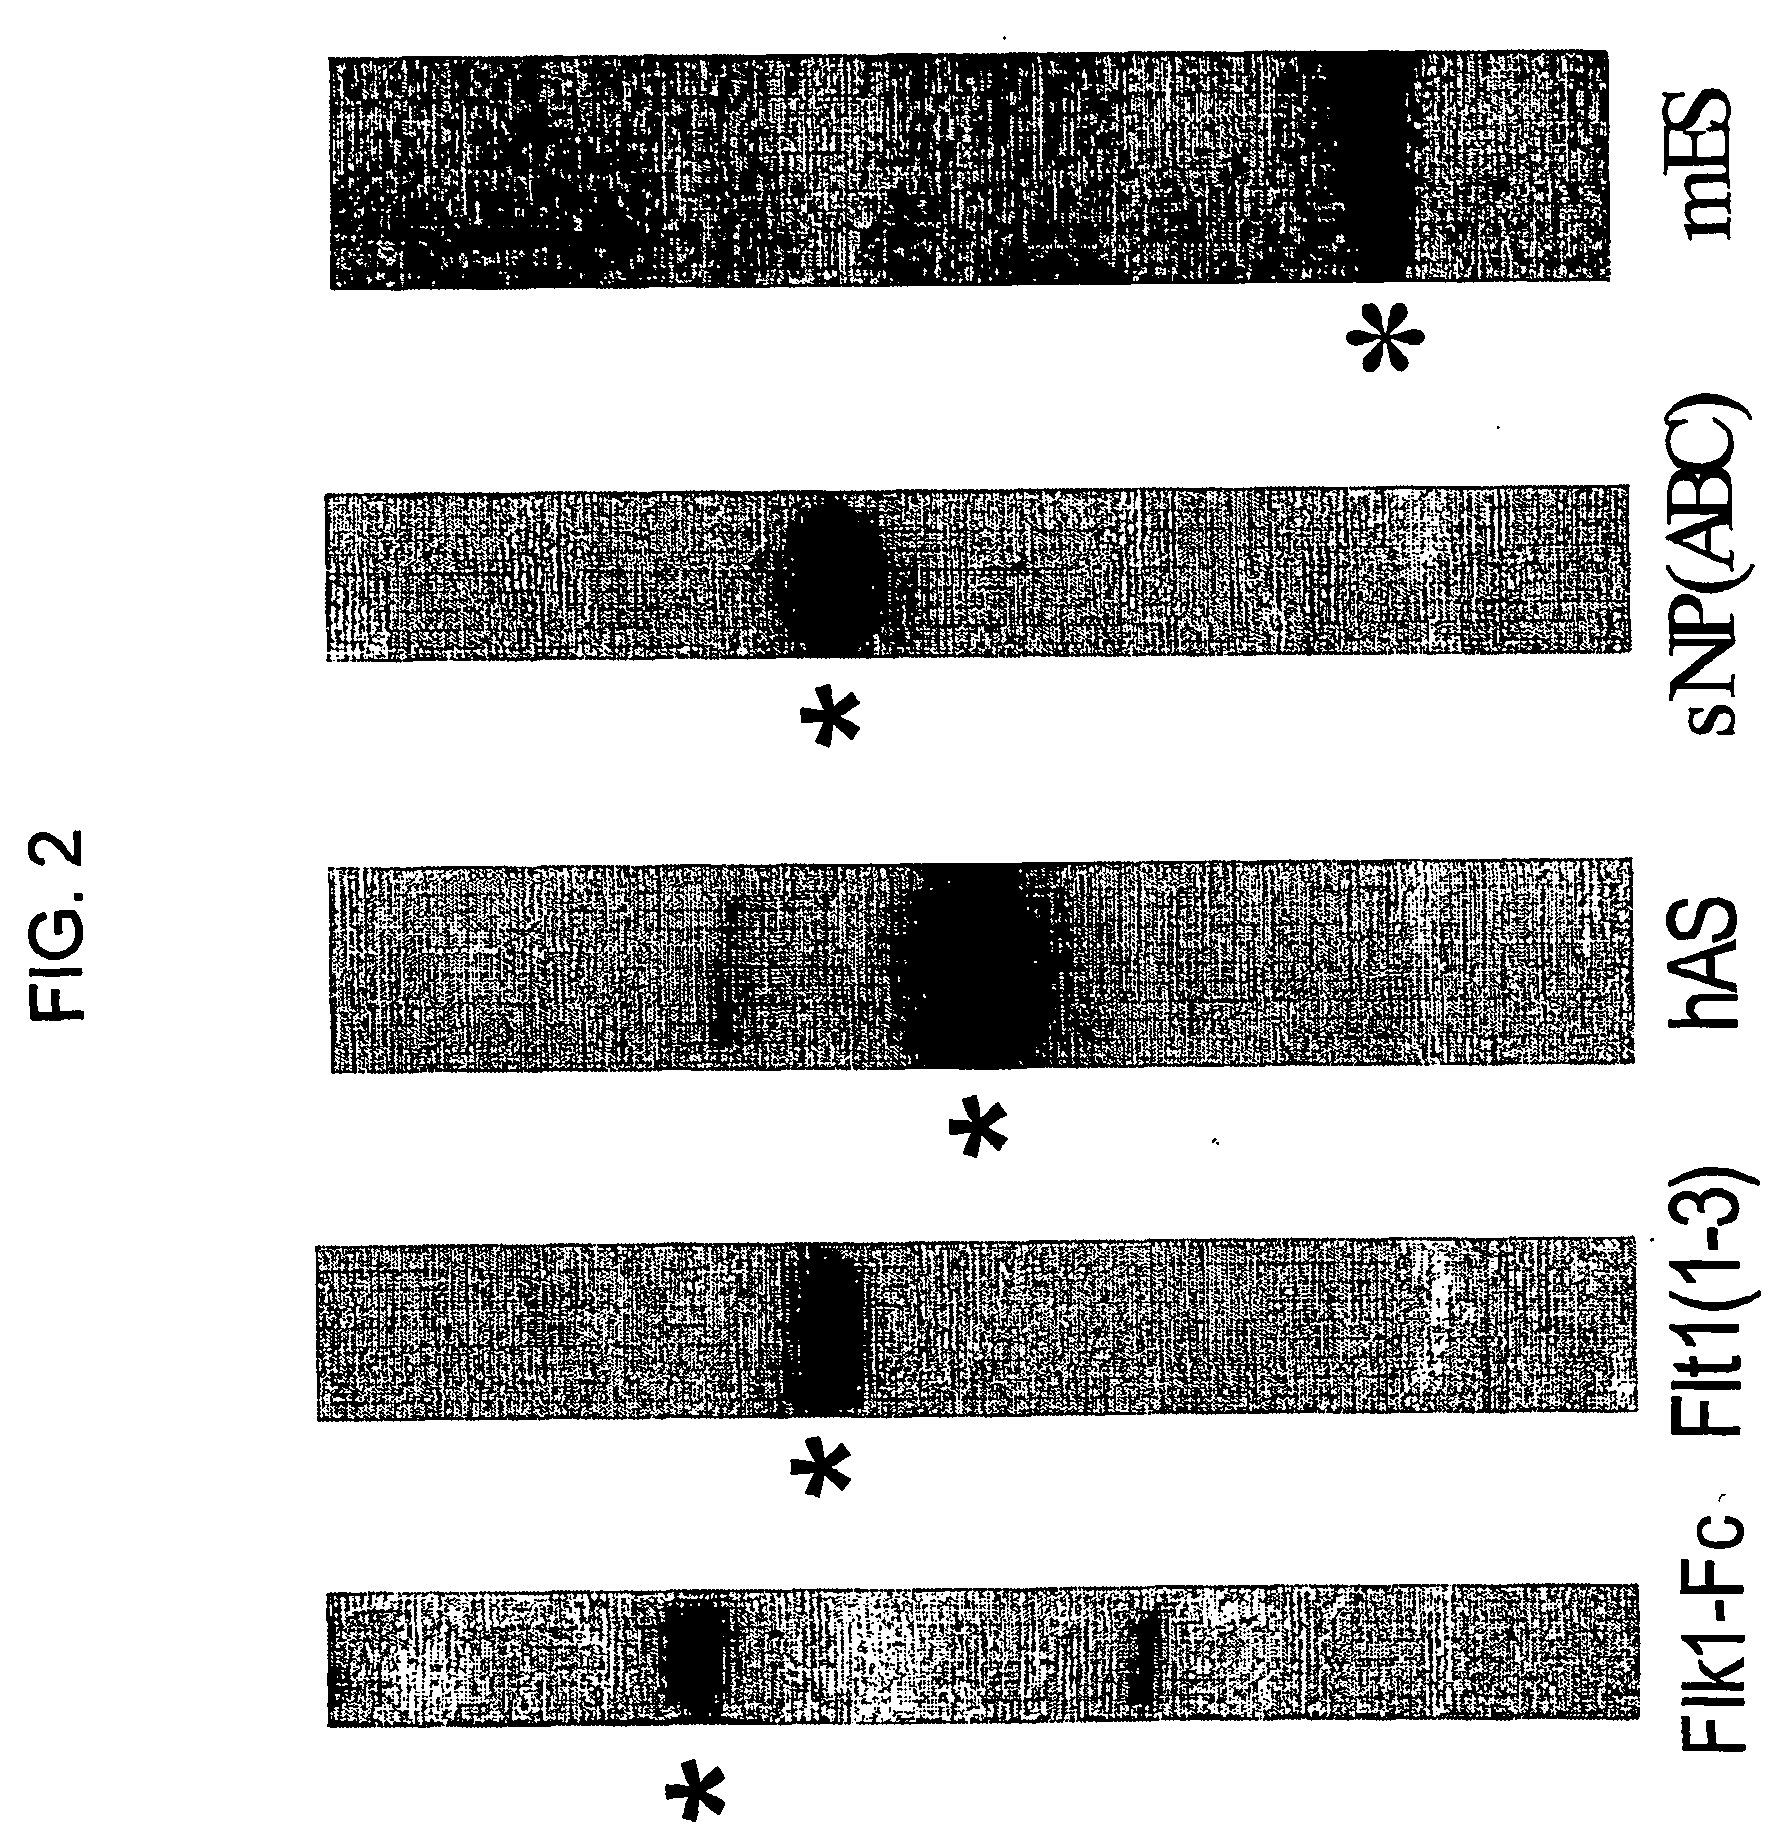 Method for treating cancer and increasing hematocrit levels